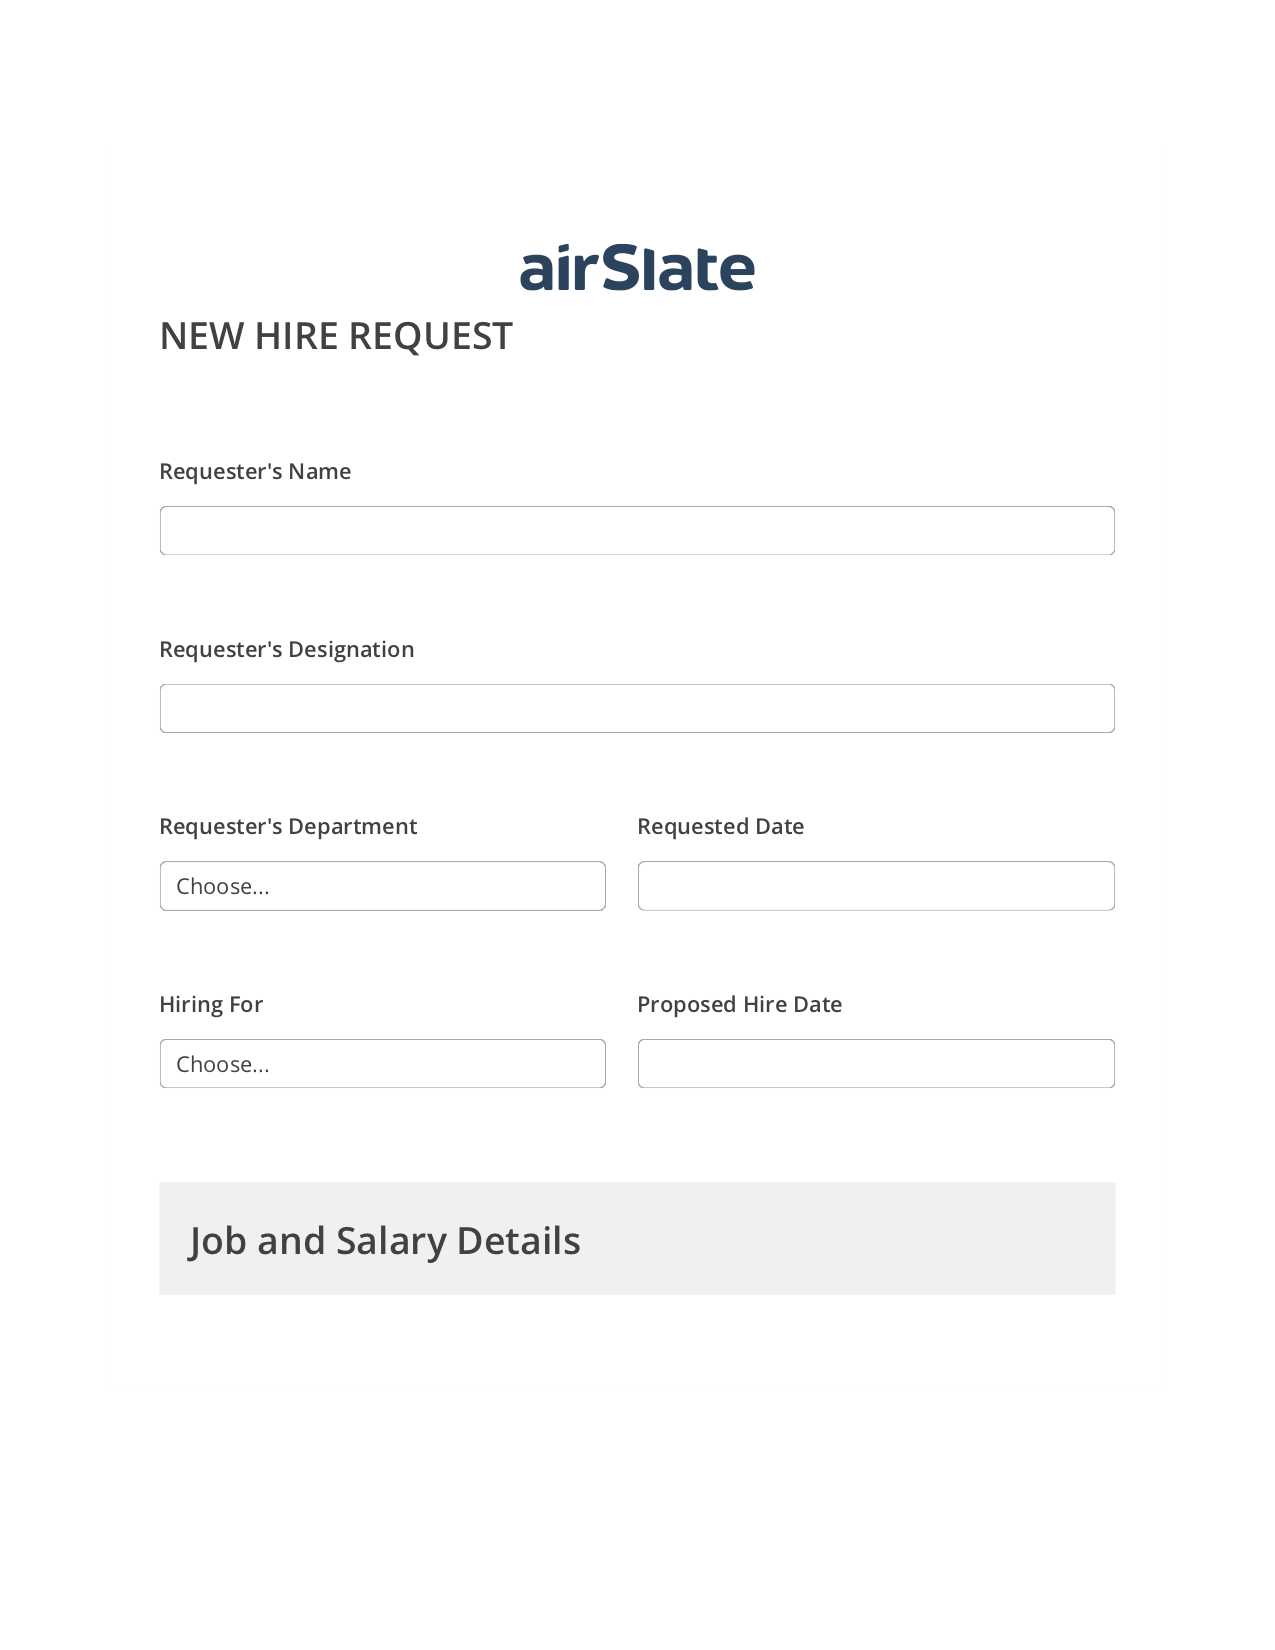 Multirole Hiring Request Workflow Pre-fill from MS Dynamics 365 Records, Remove Slate Bot, Export to MySQL Bot